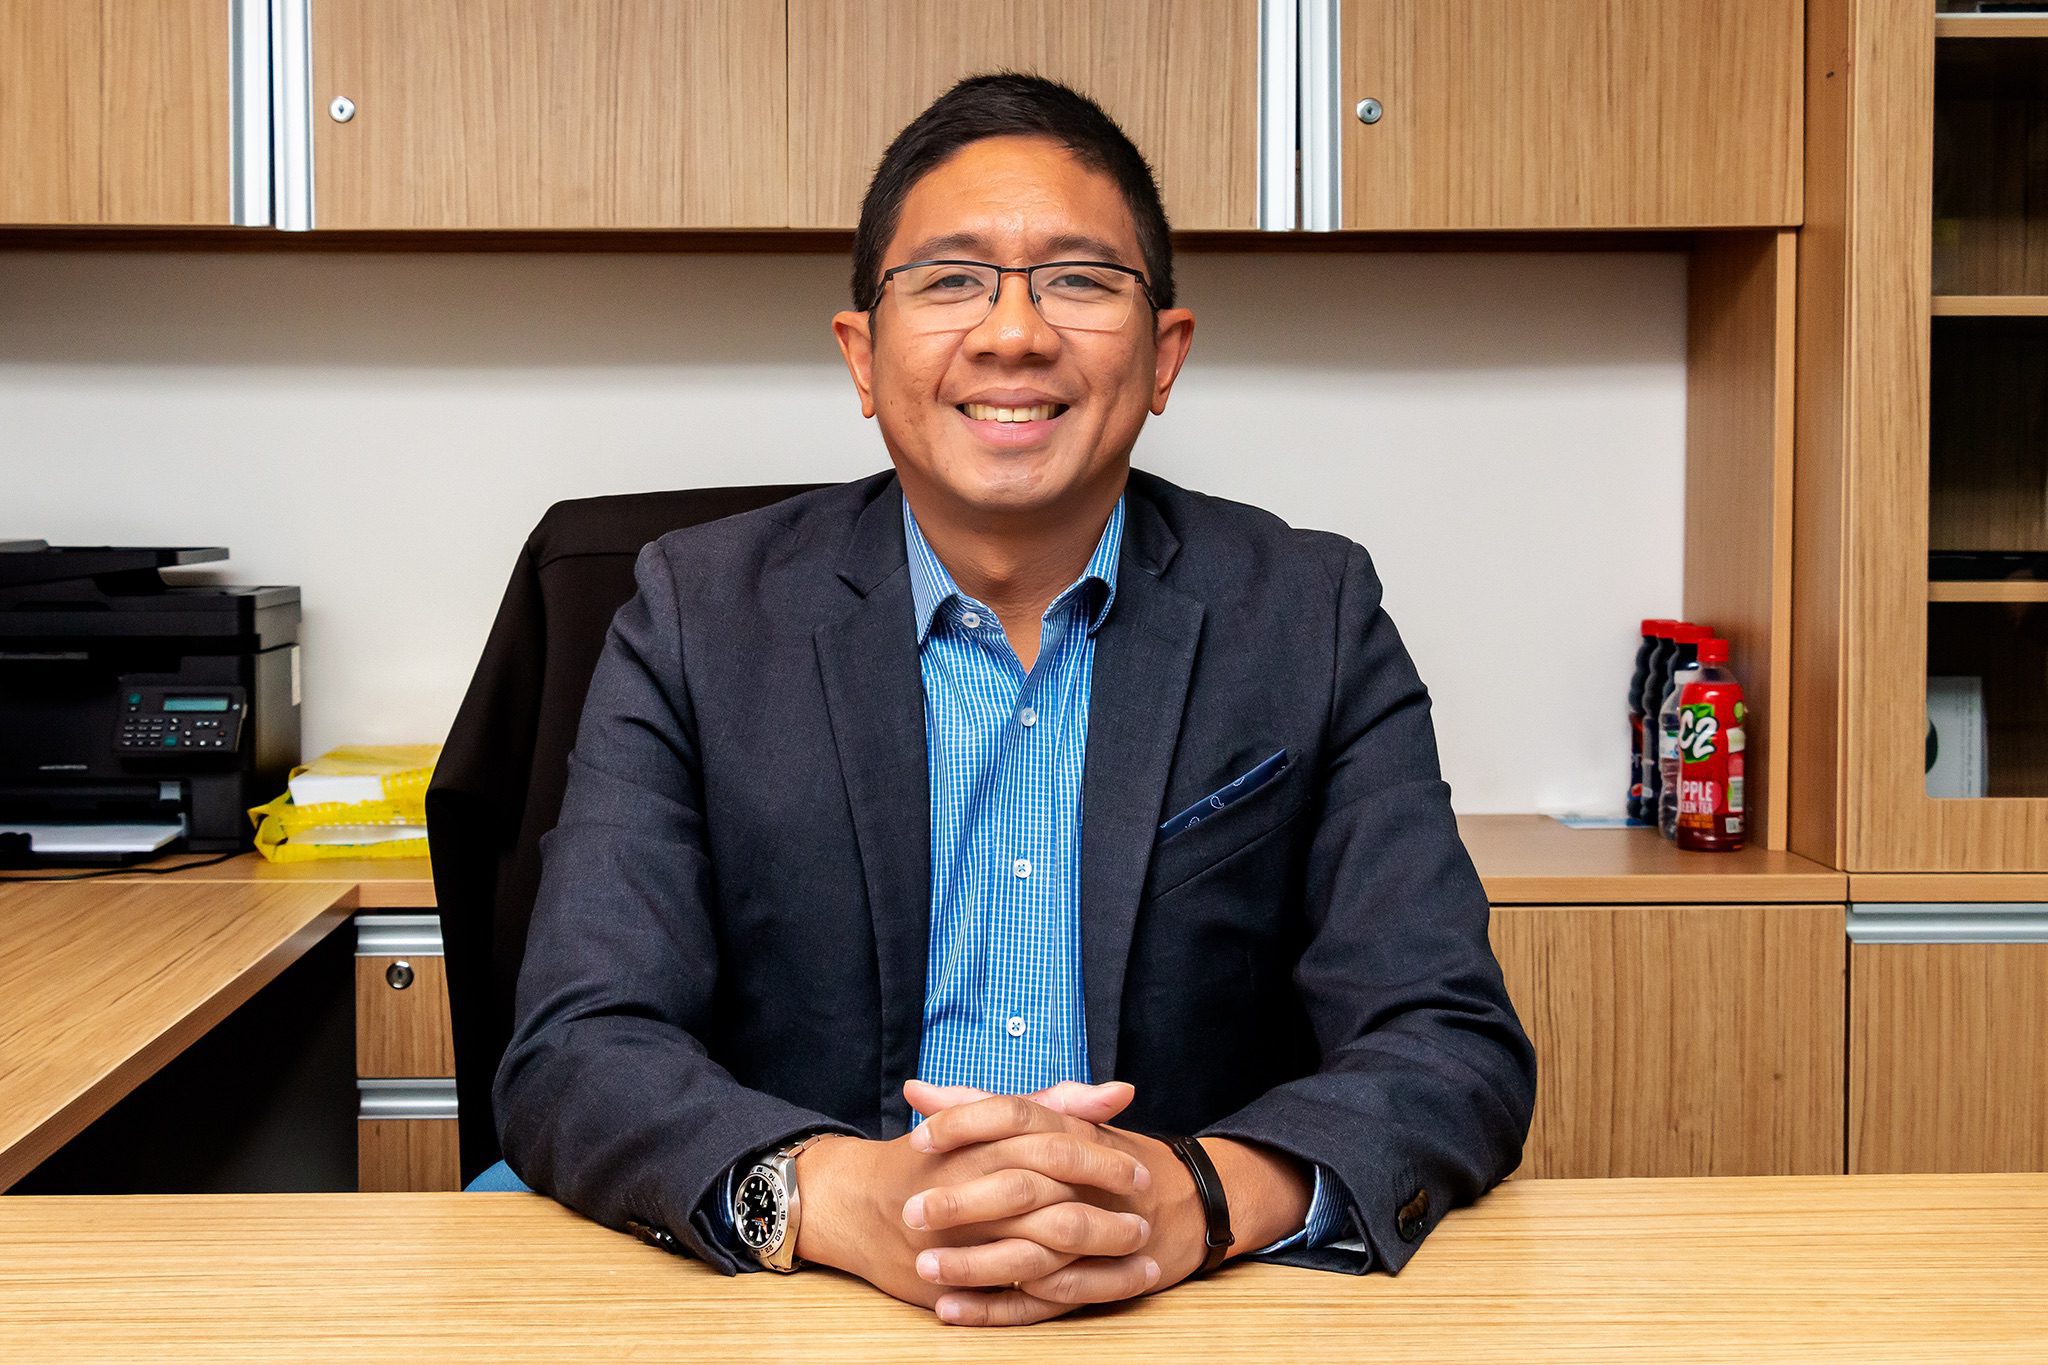 Q&A with URC Beverage MD Oscar Villamora on Managing Managers